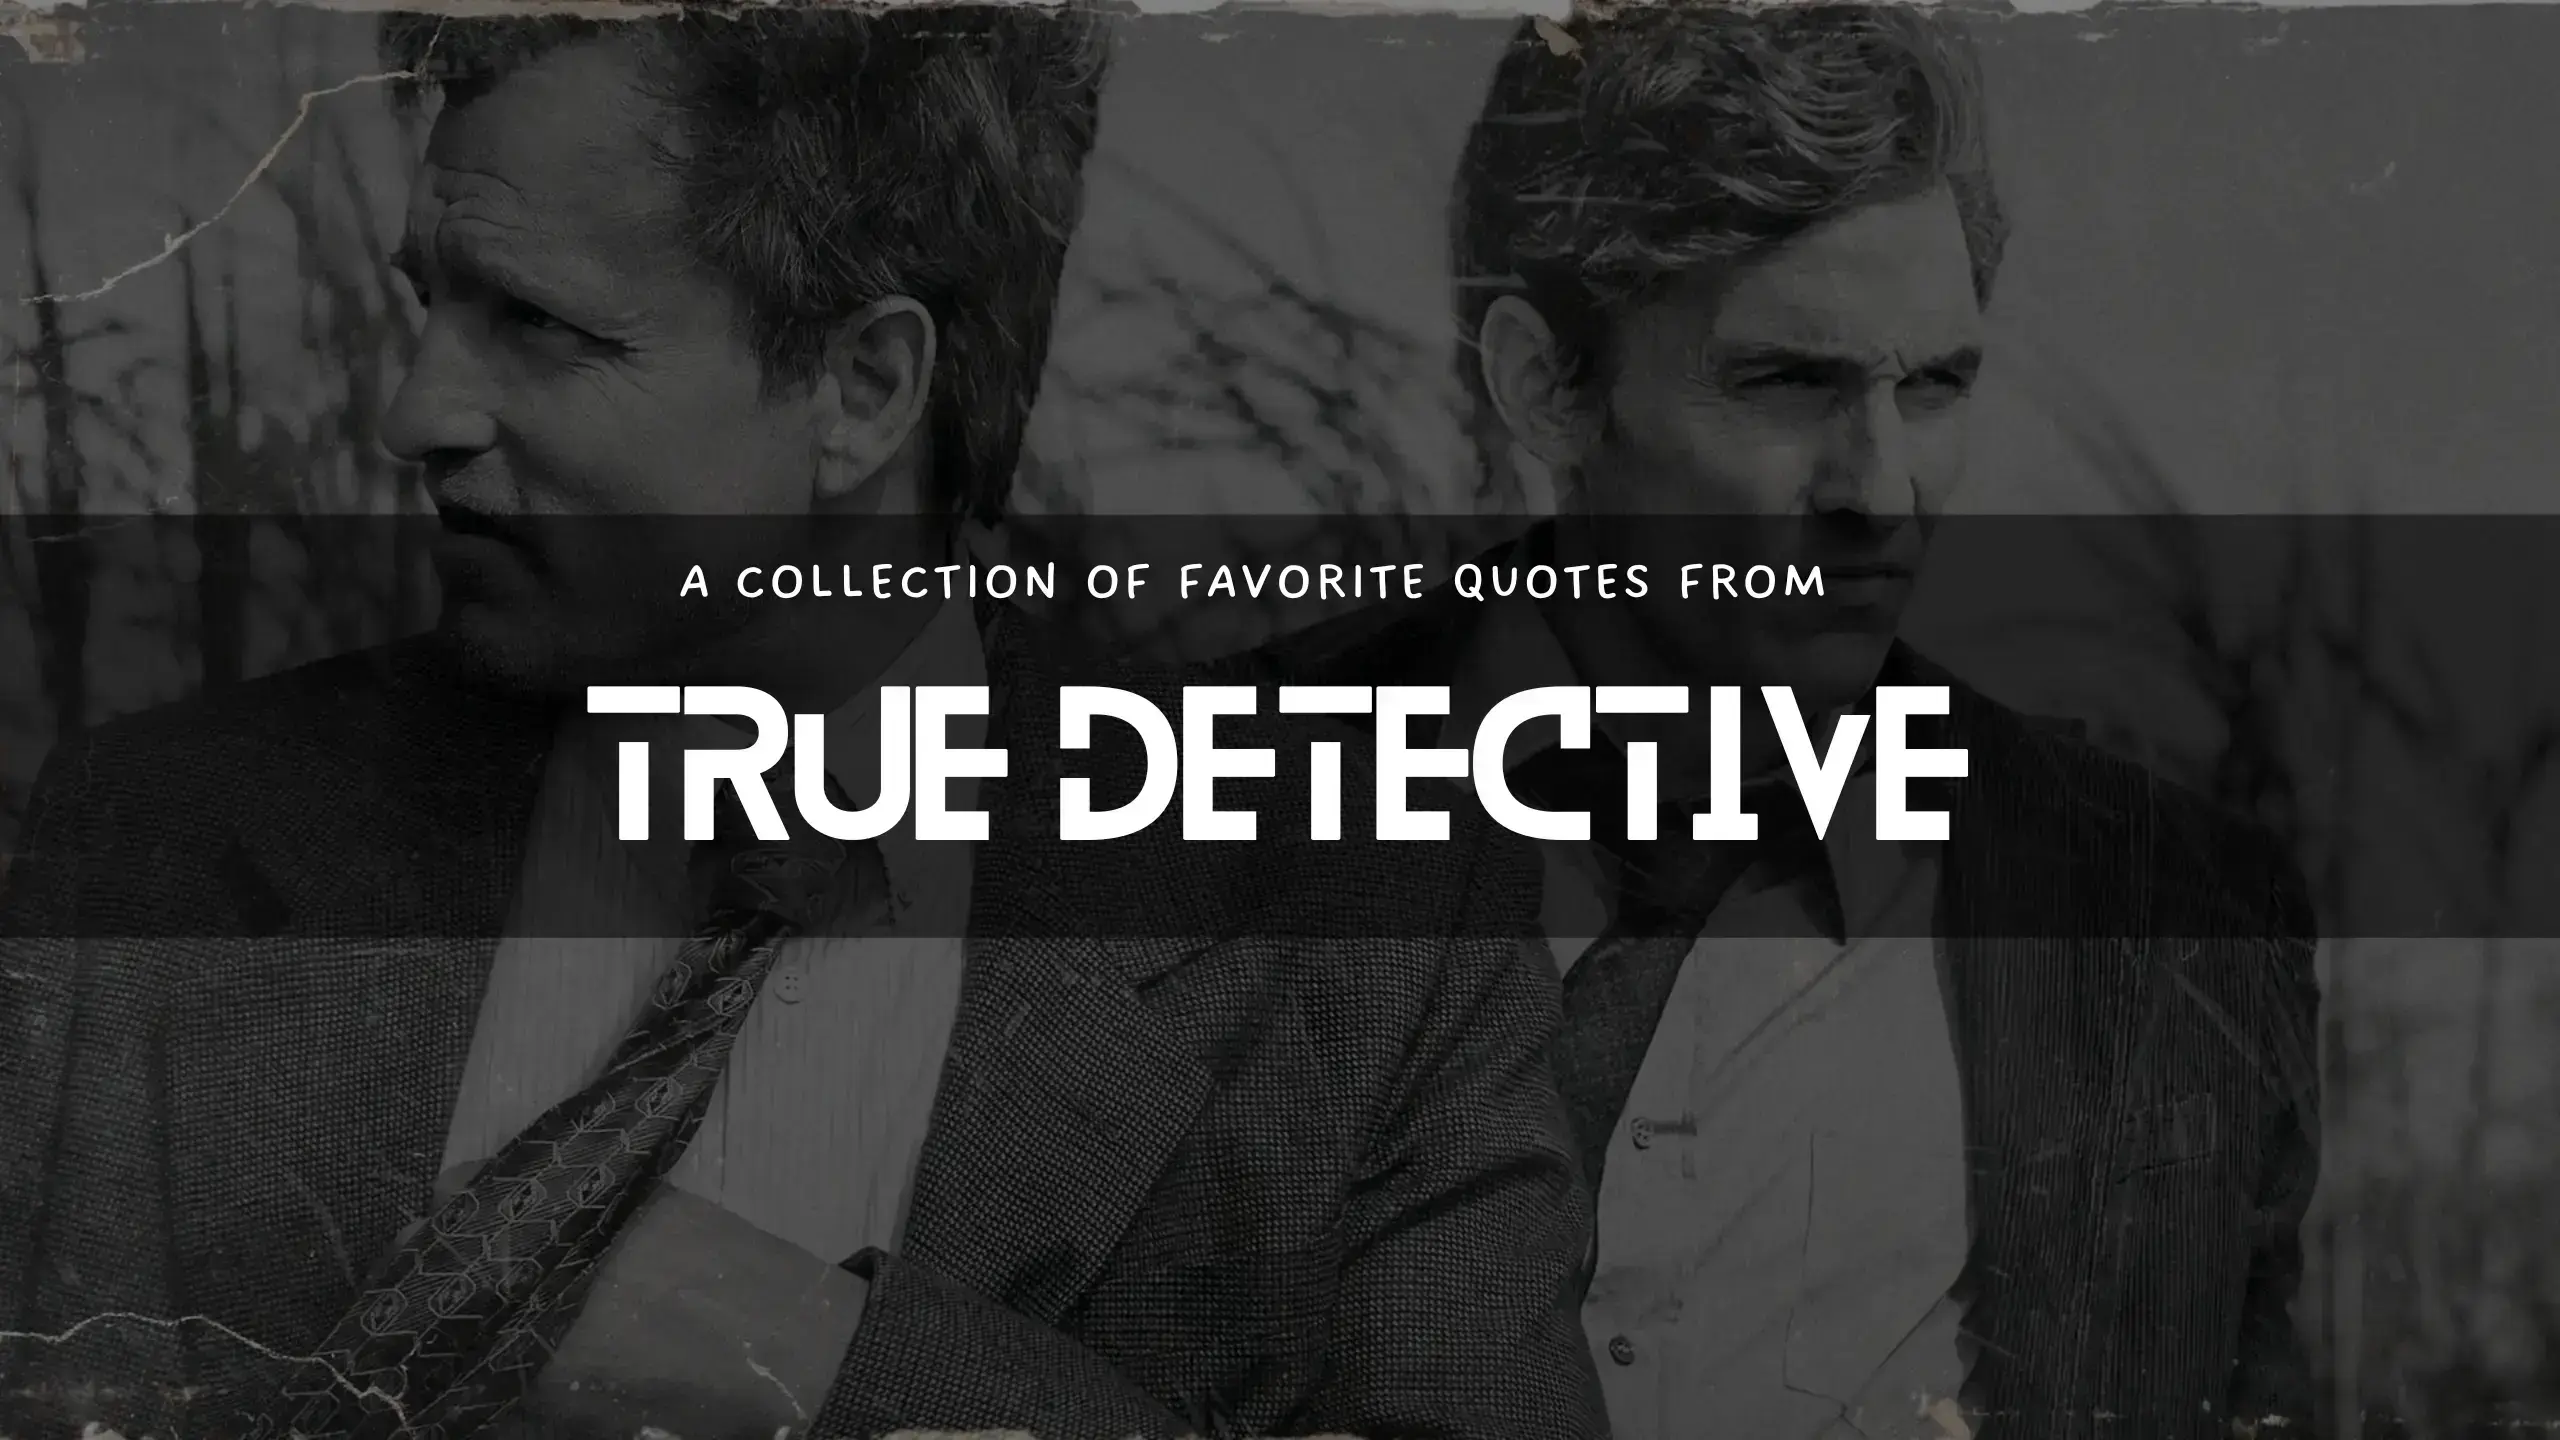 Awesome quotes from True Detective